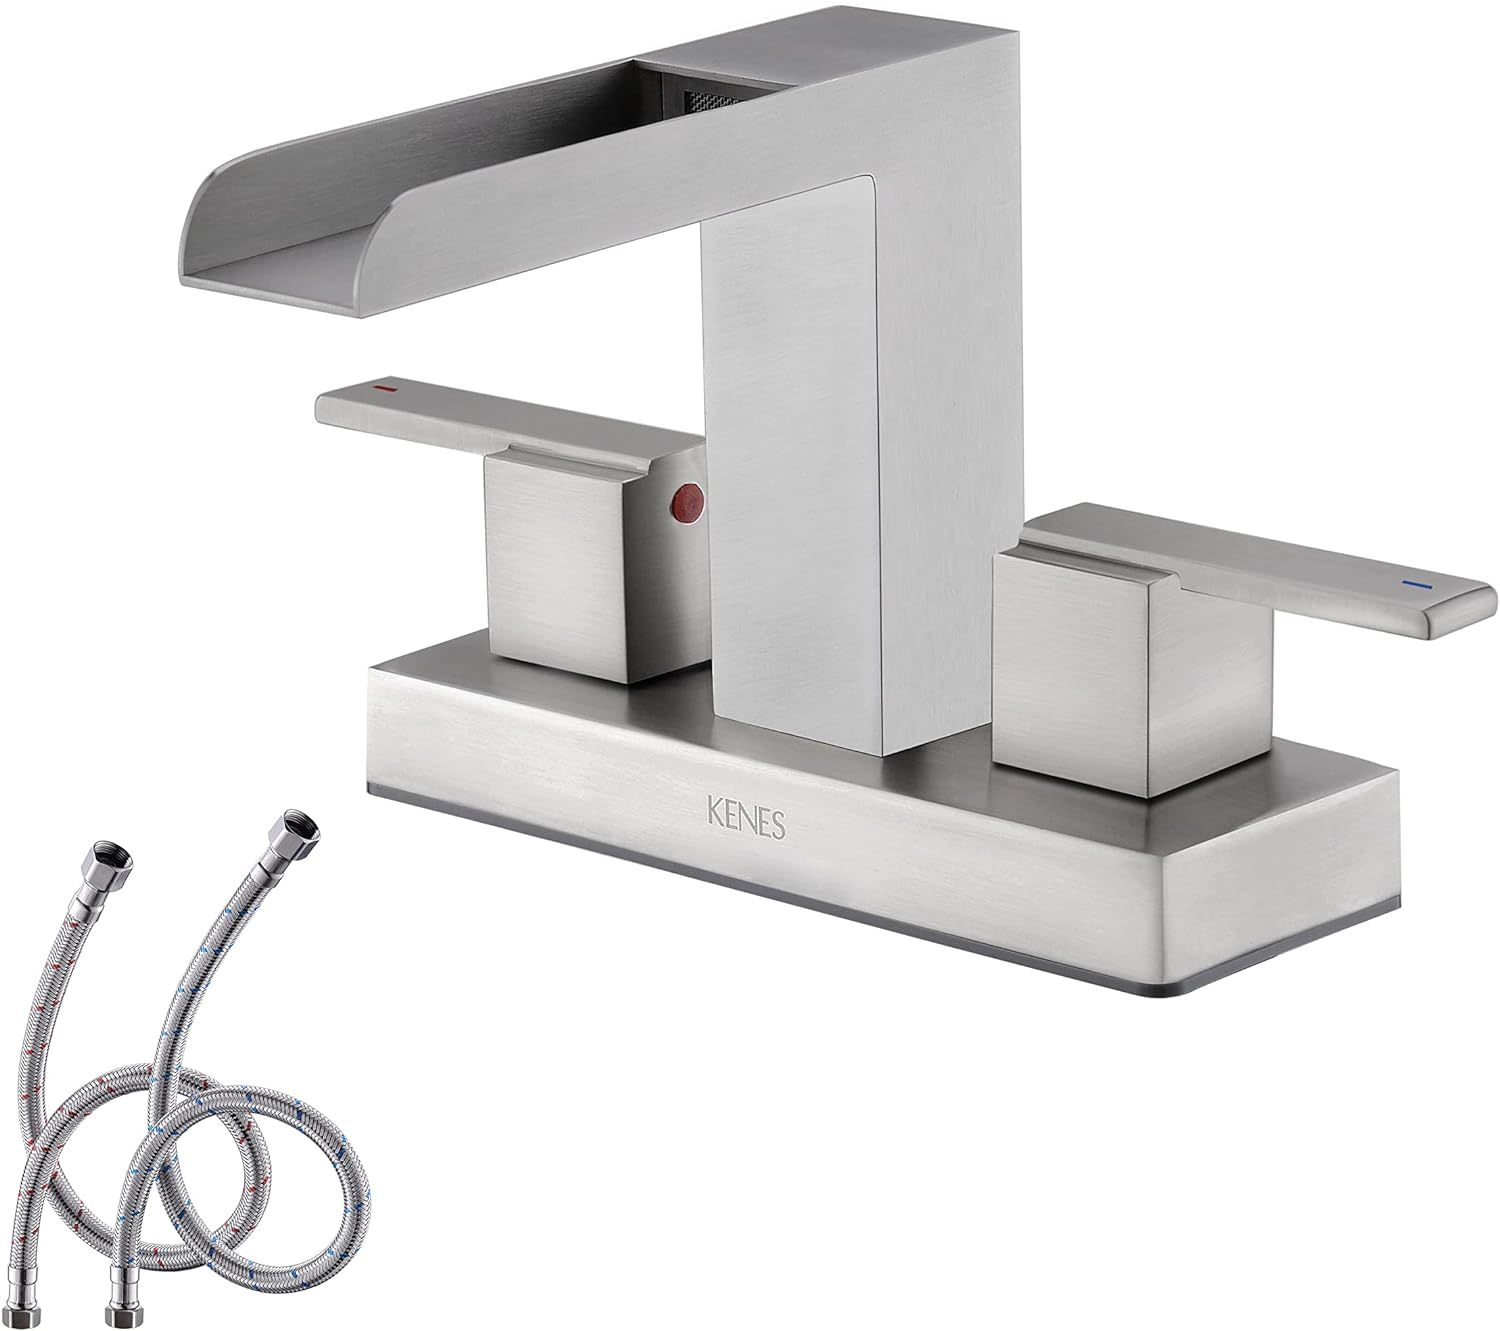 Primary image for Kenes Brushed Nickel Centerset 4 Inch Waterfall Bathroom Faucet, 9053.